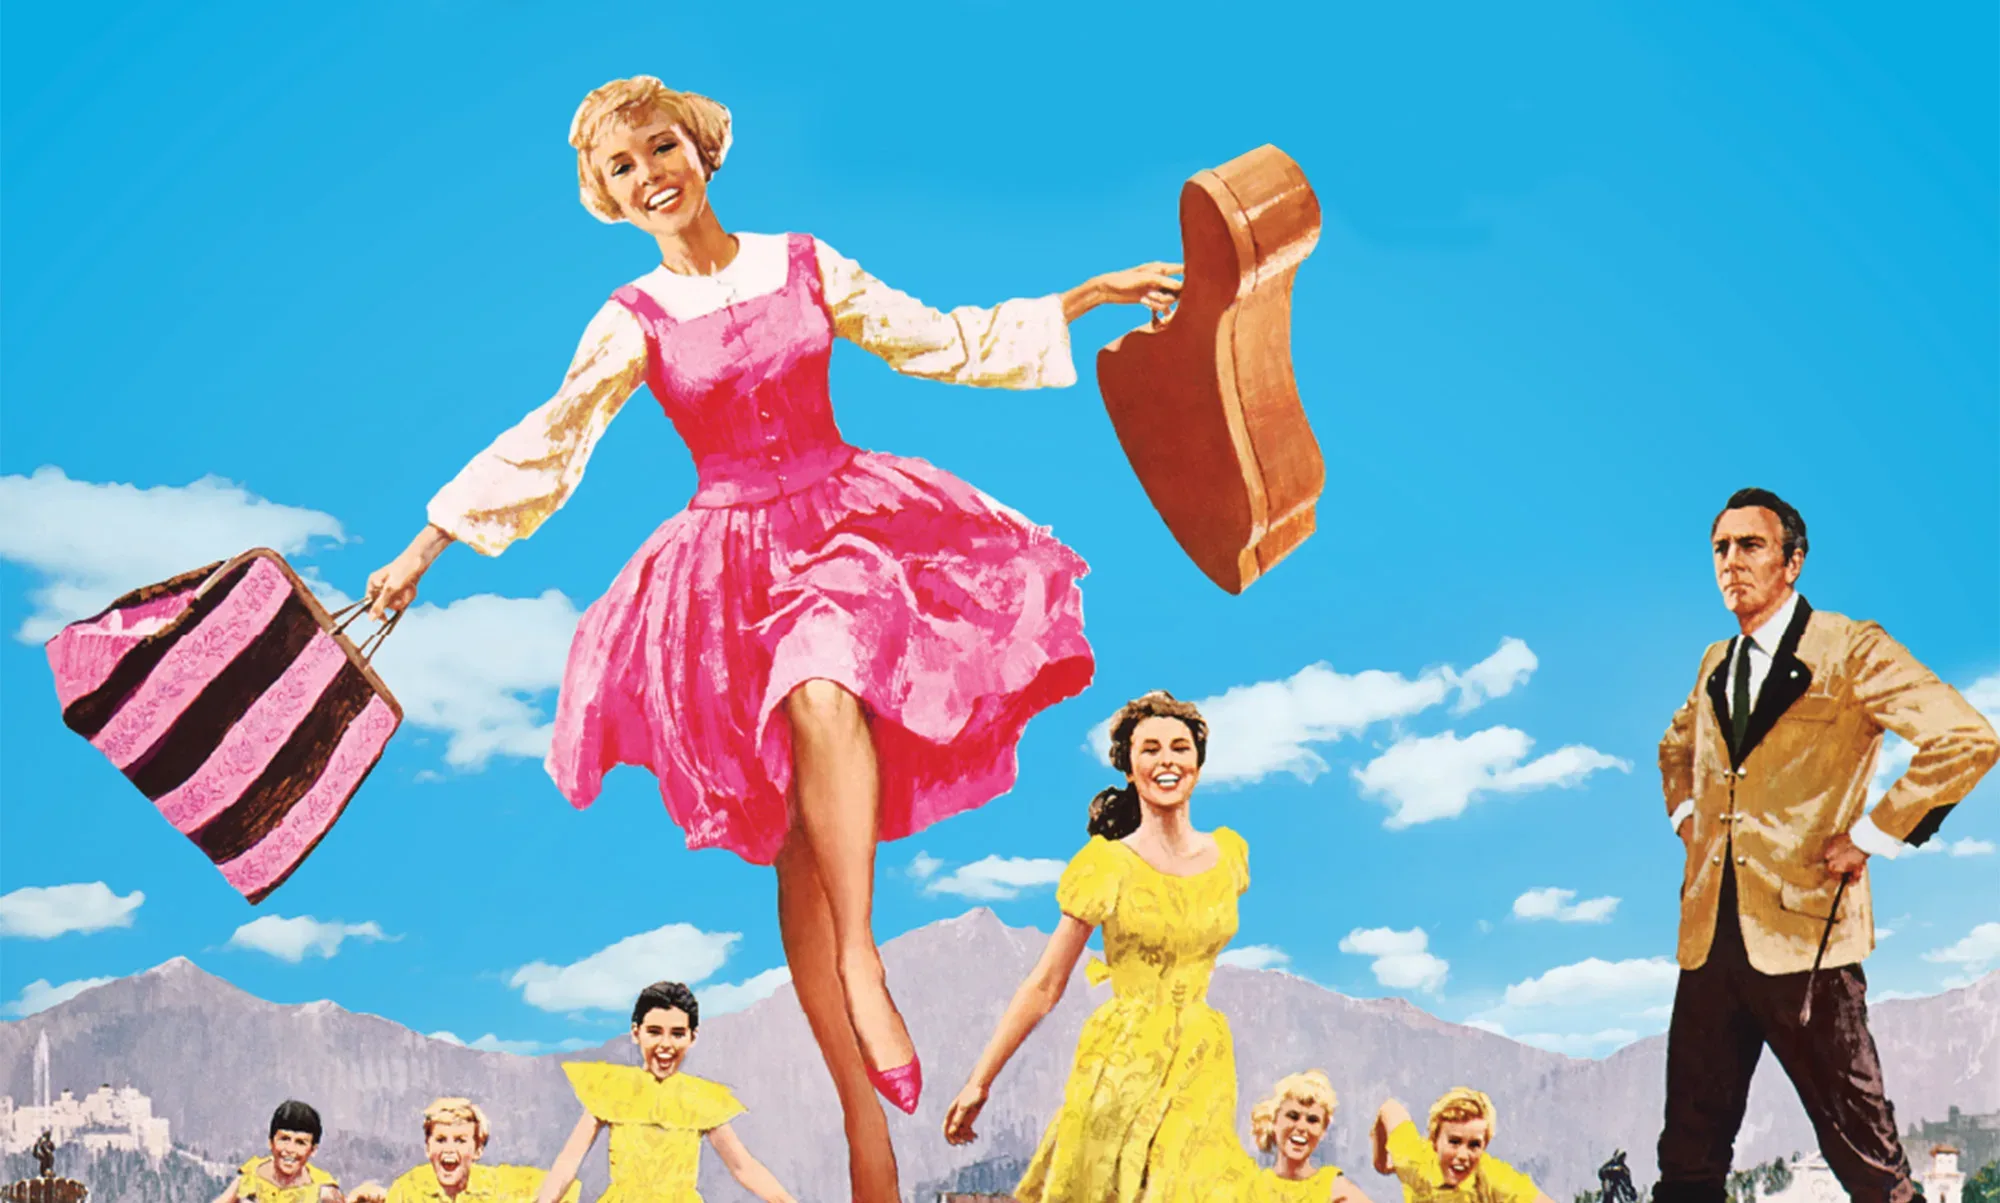 Promotional movie poster for the Sound of Music with Julie Andrews skipping through a field in a pink dress